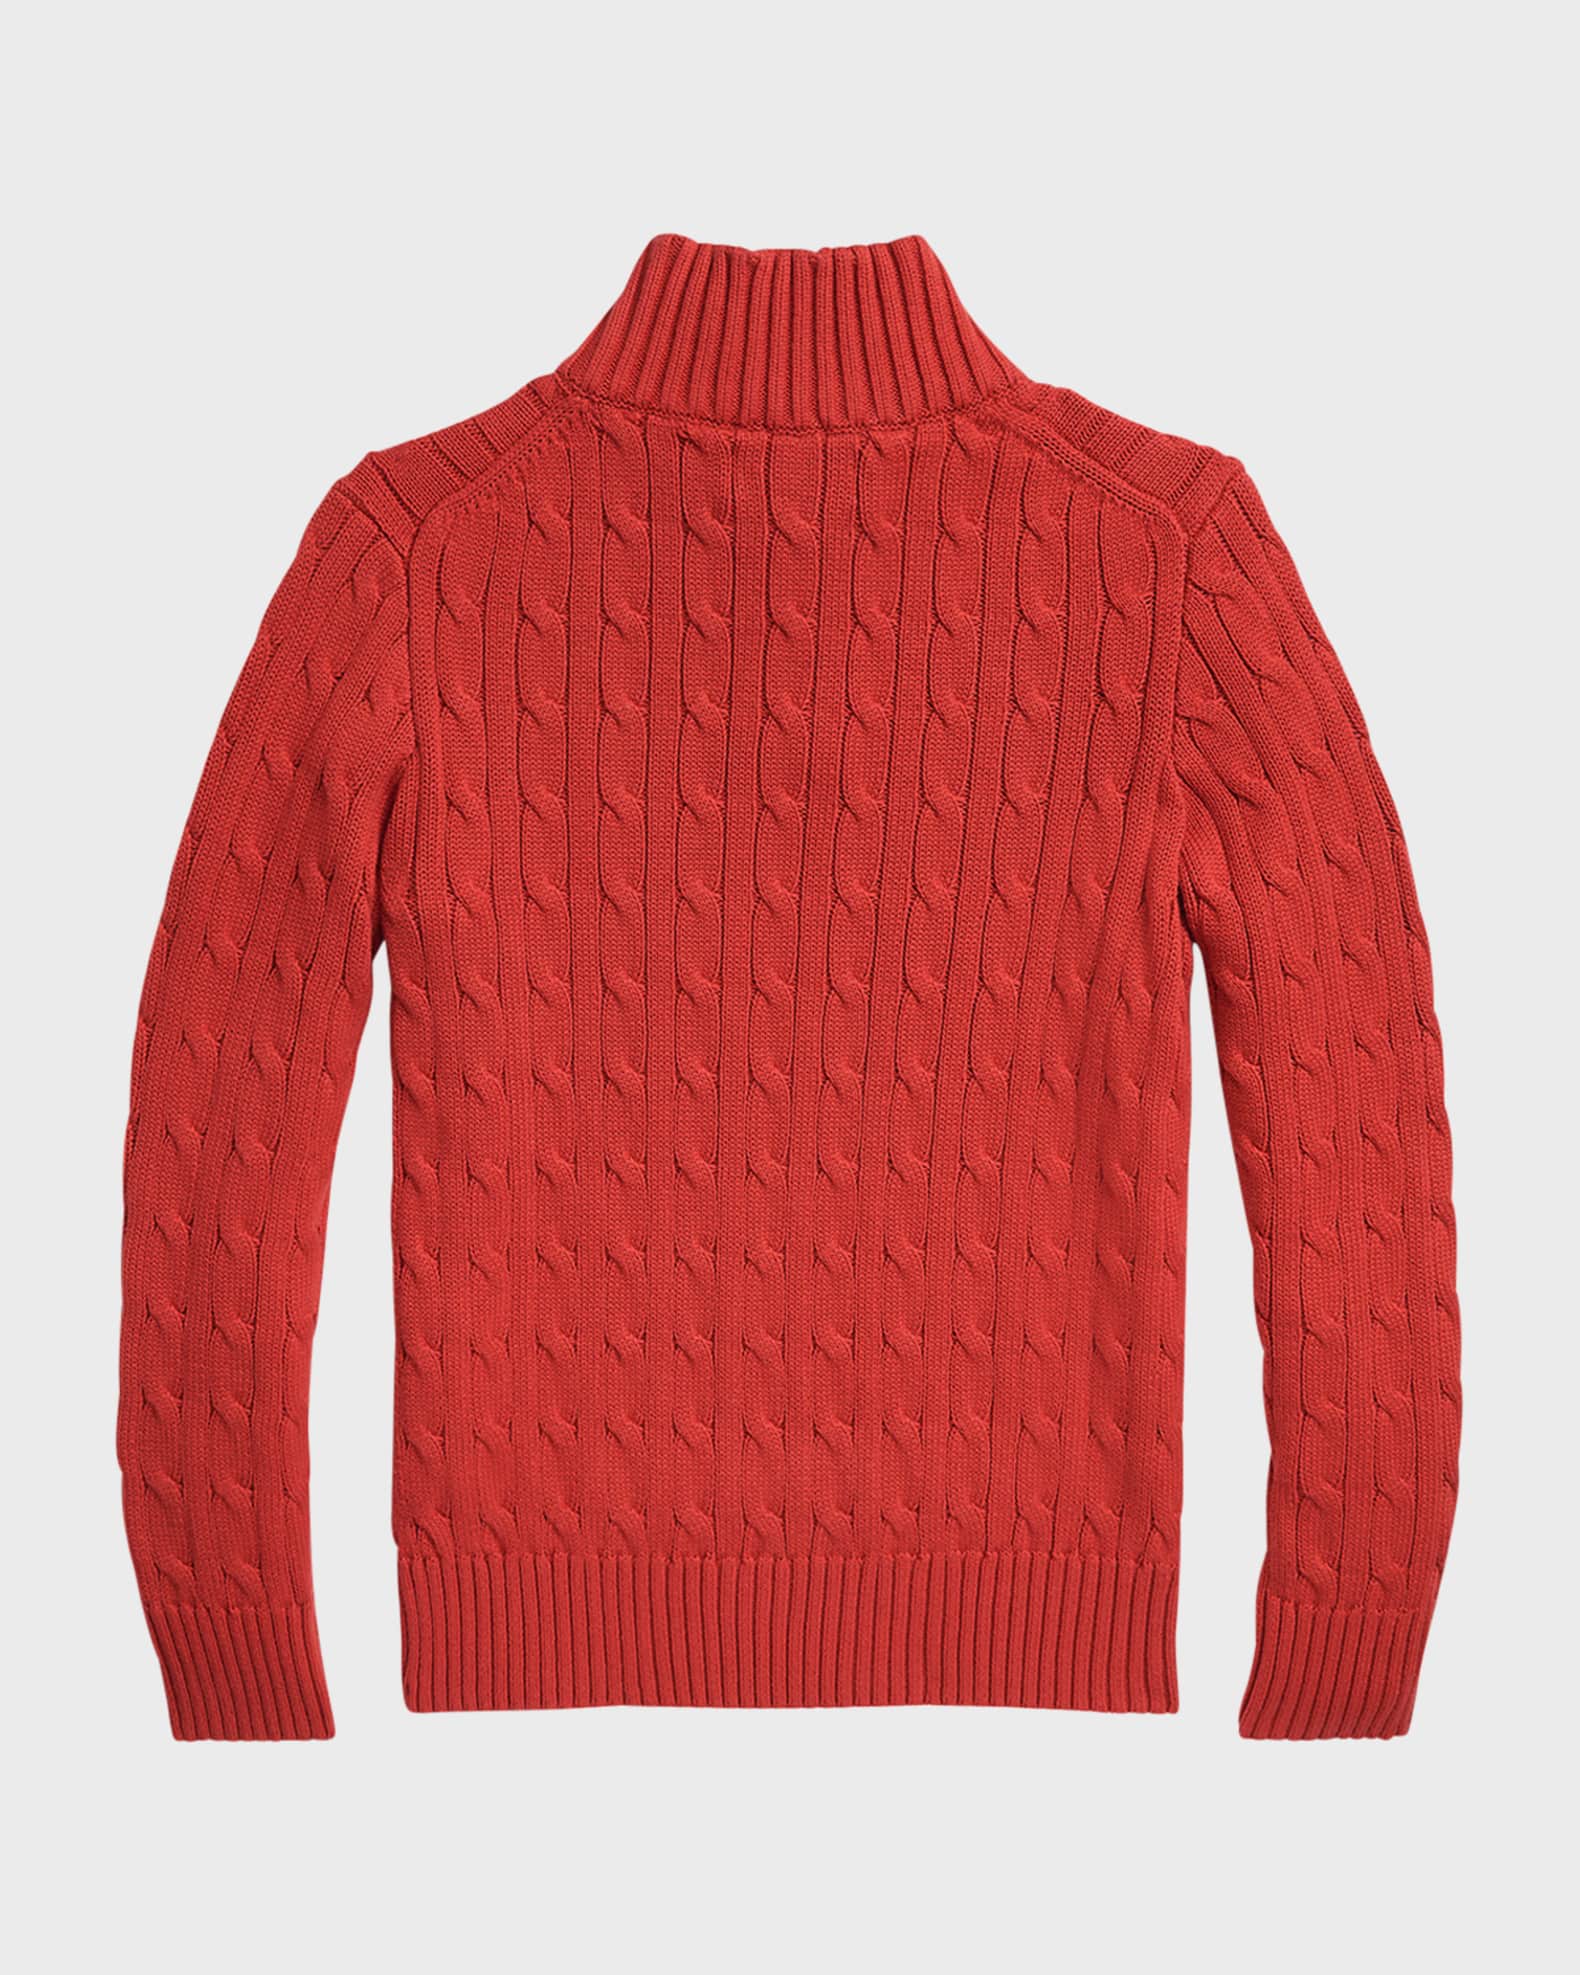 Louis Vuitton Ribbed Accent Turtleneck, Red, XL